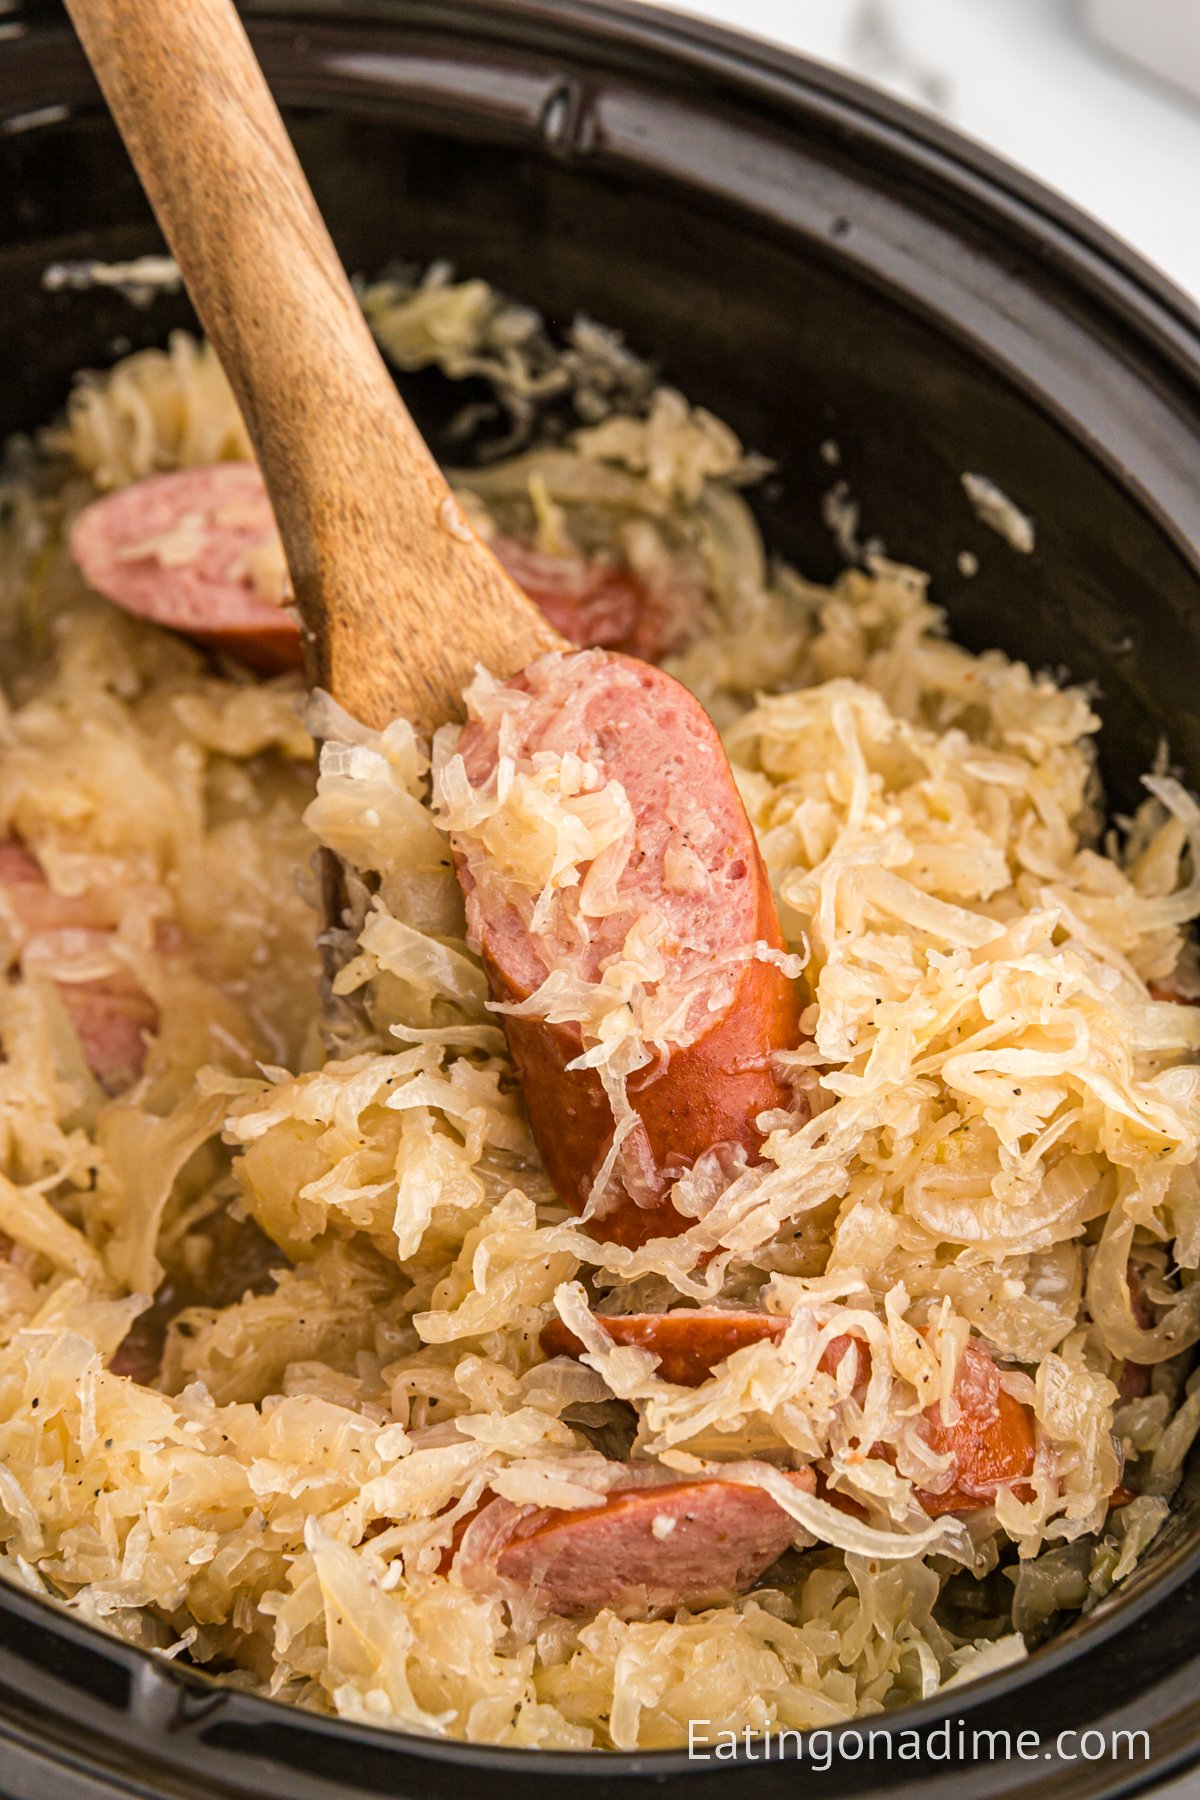 Sauerkraut and slice sausage in the crock pot with a wooden spoon